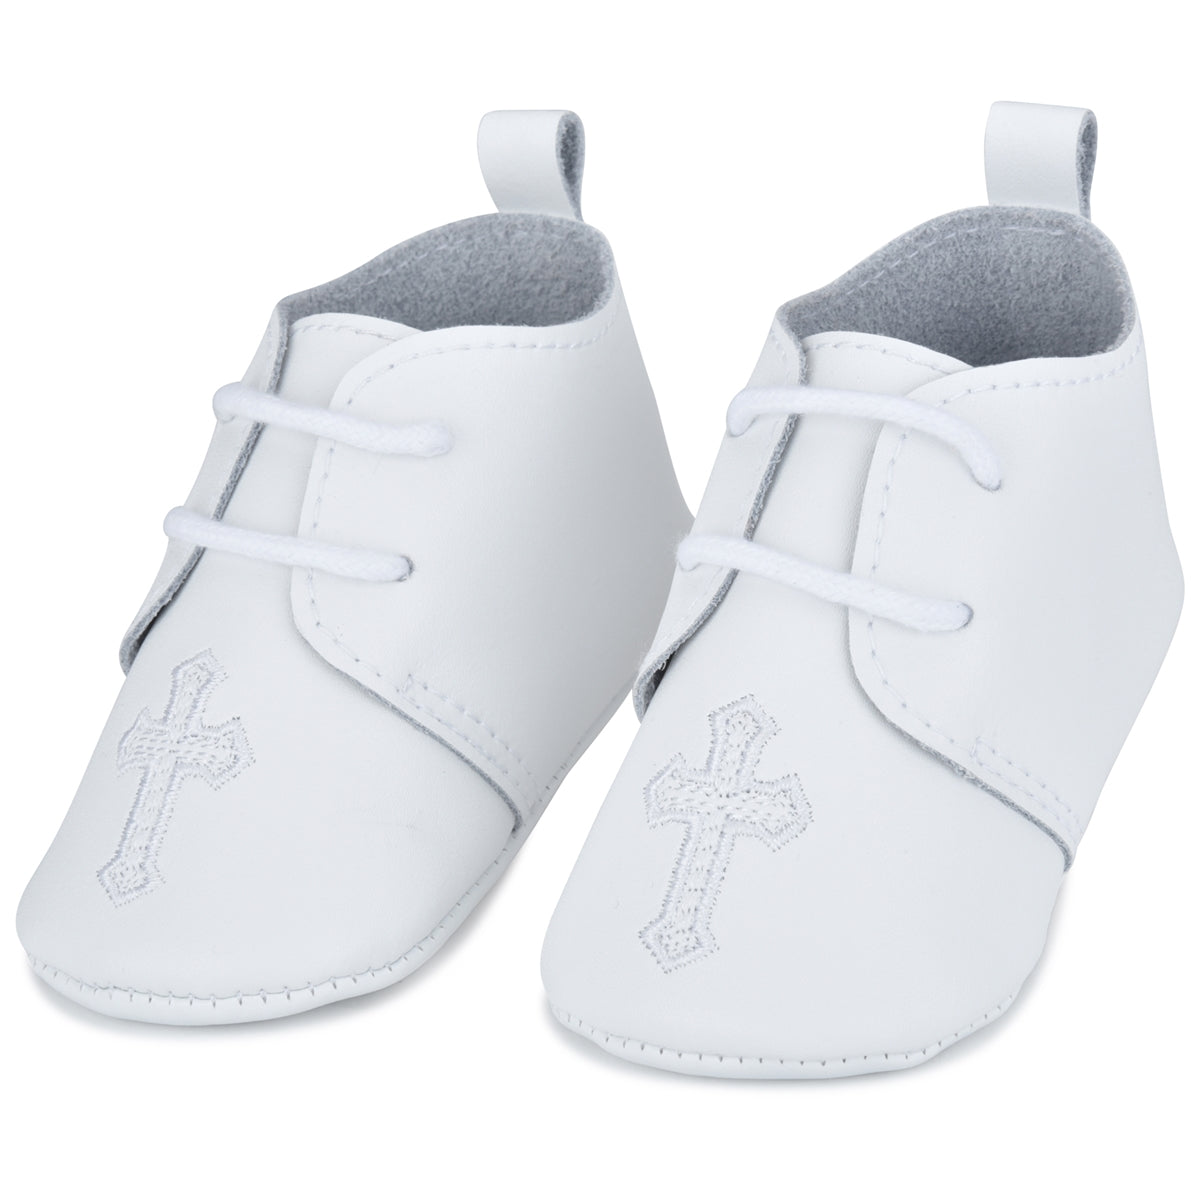 baby baptism shoes